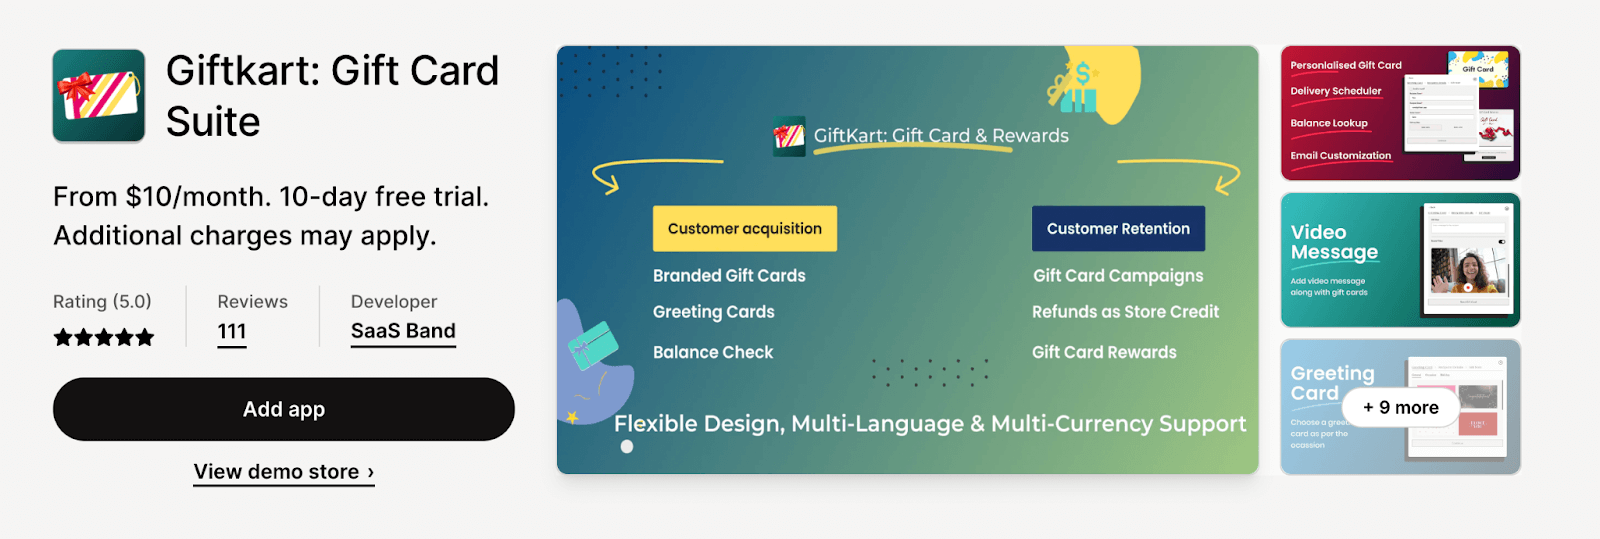 Giftkart: Gift Card Suite